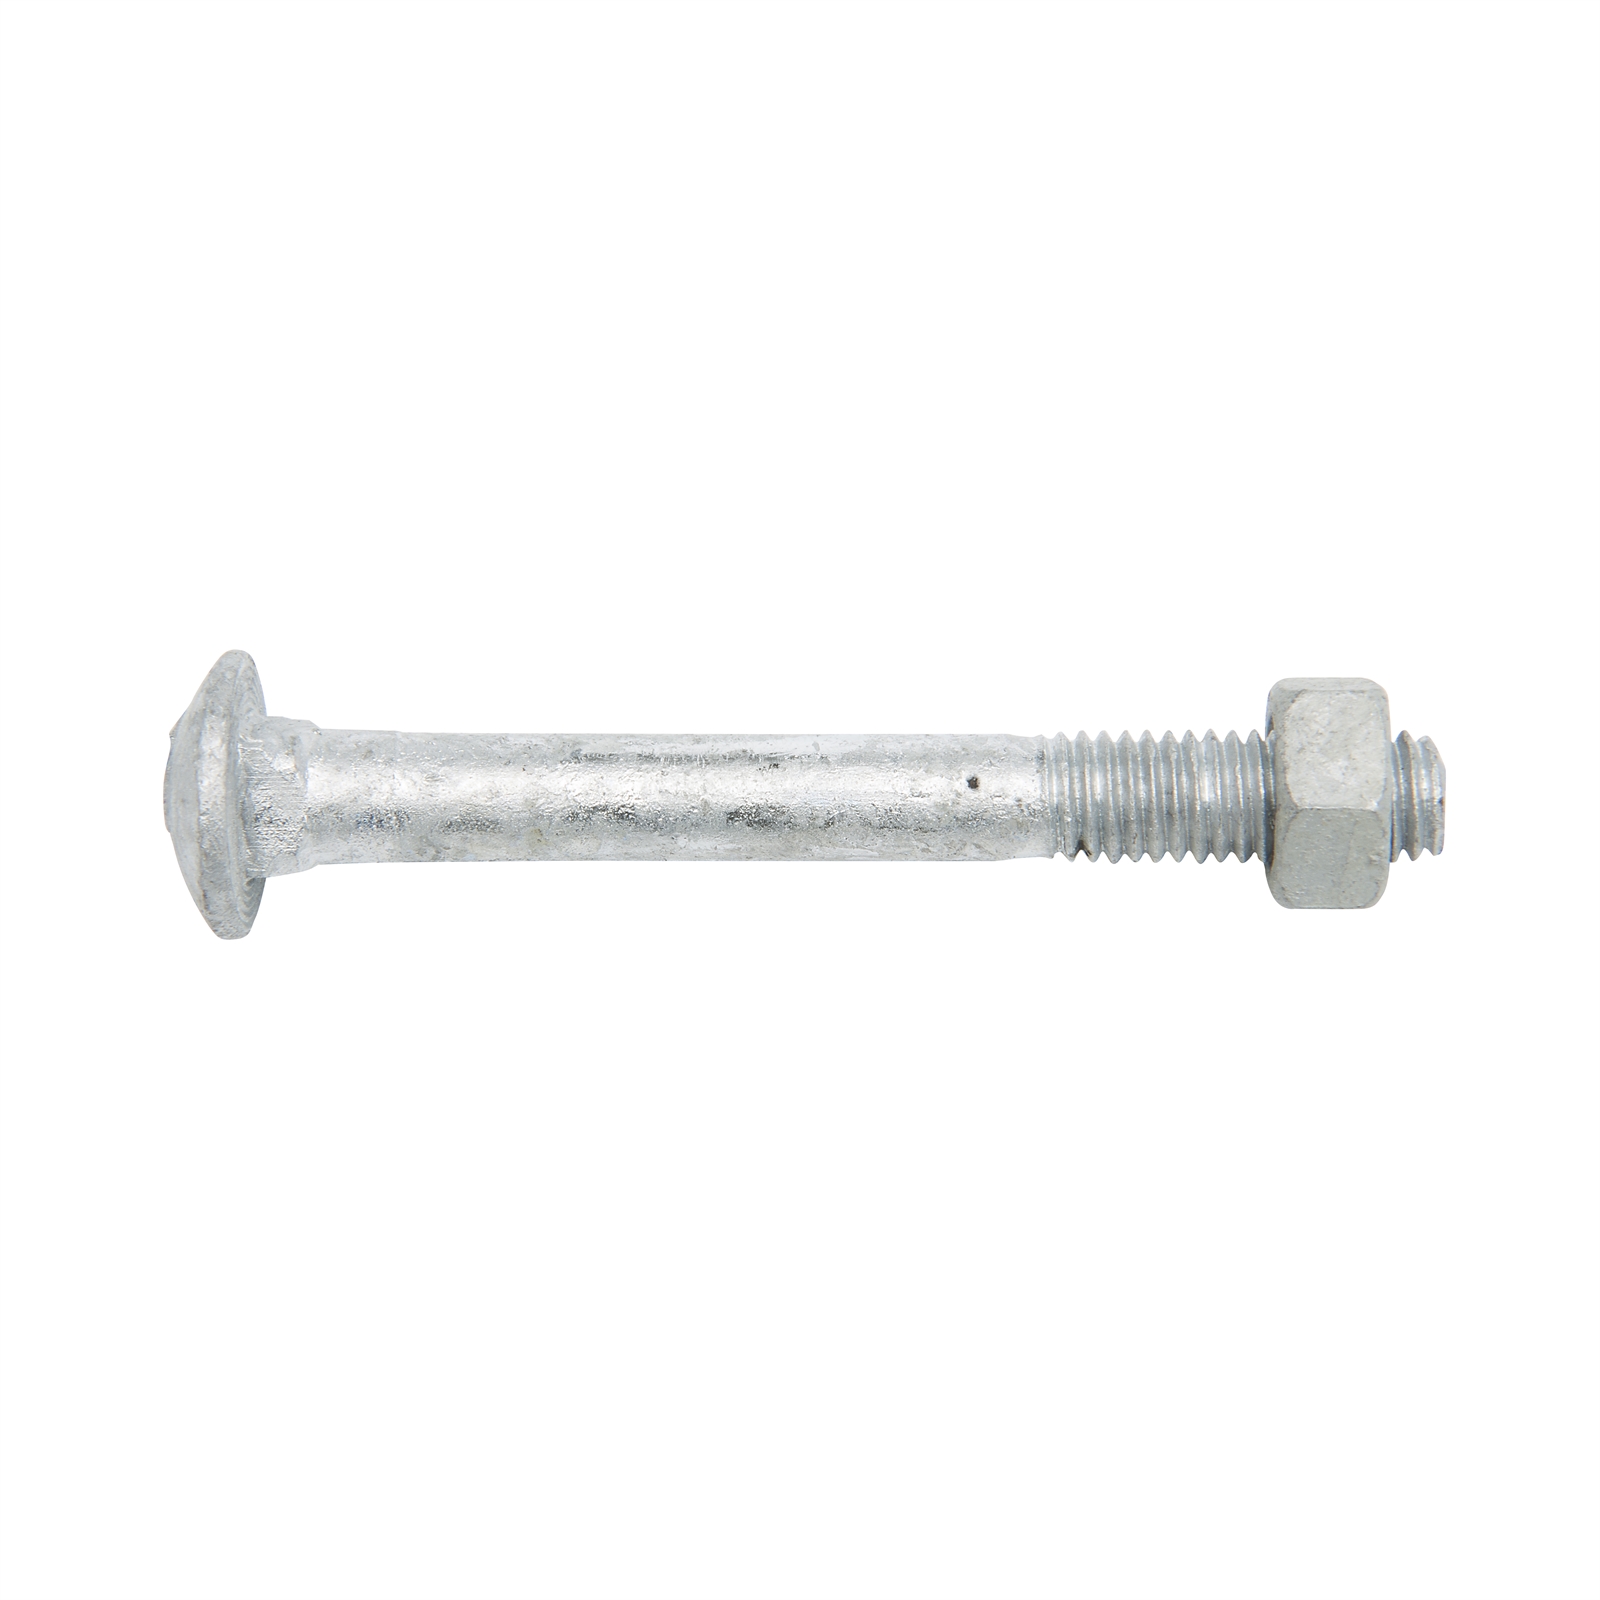 Zenith M8 x 70mm Galvanised Cup Head Bolt and Nut